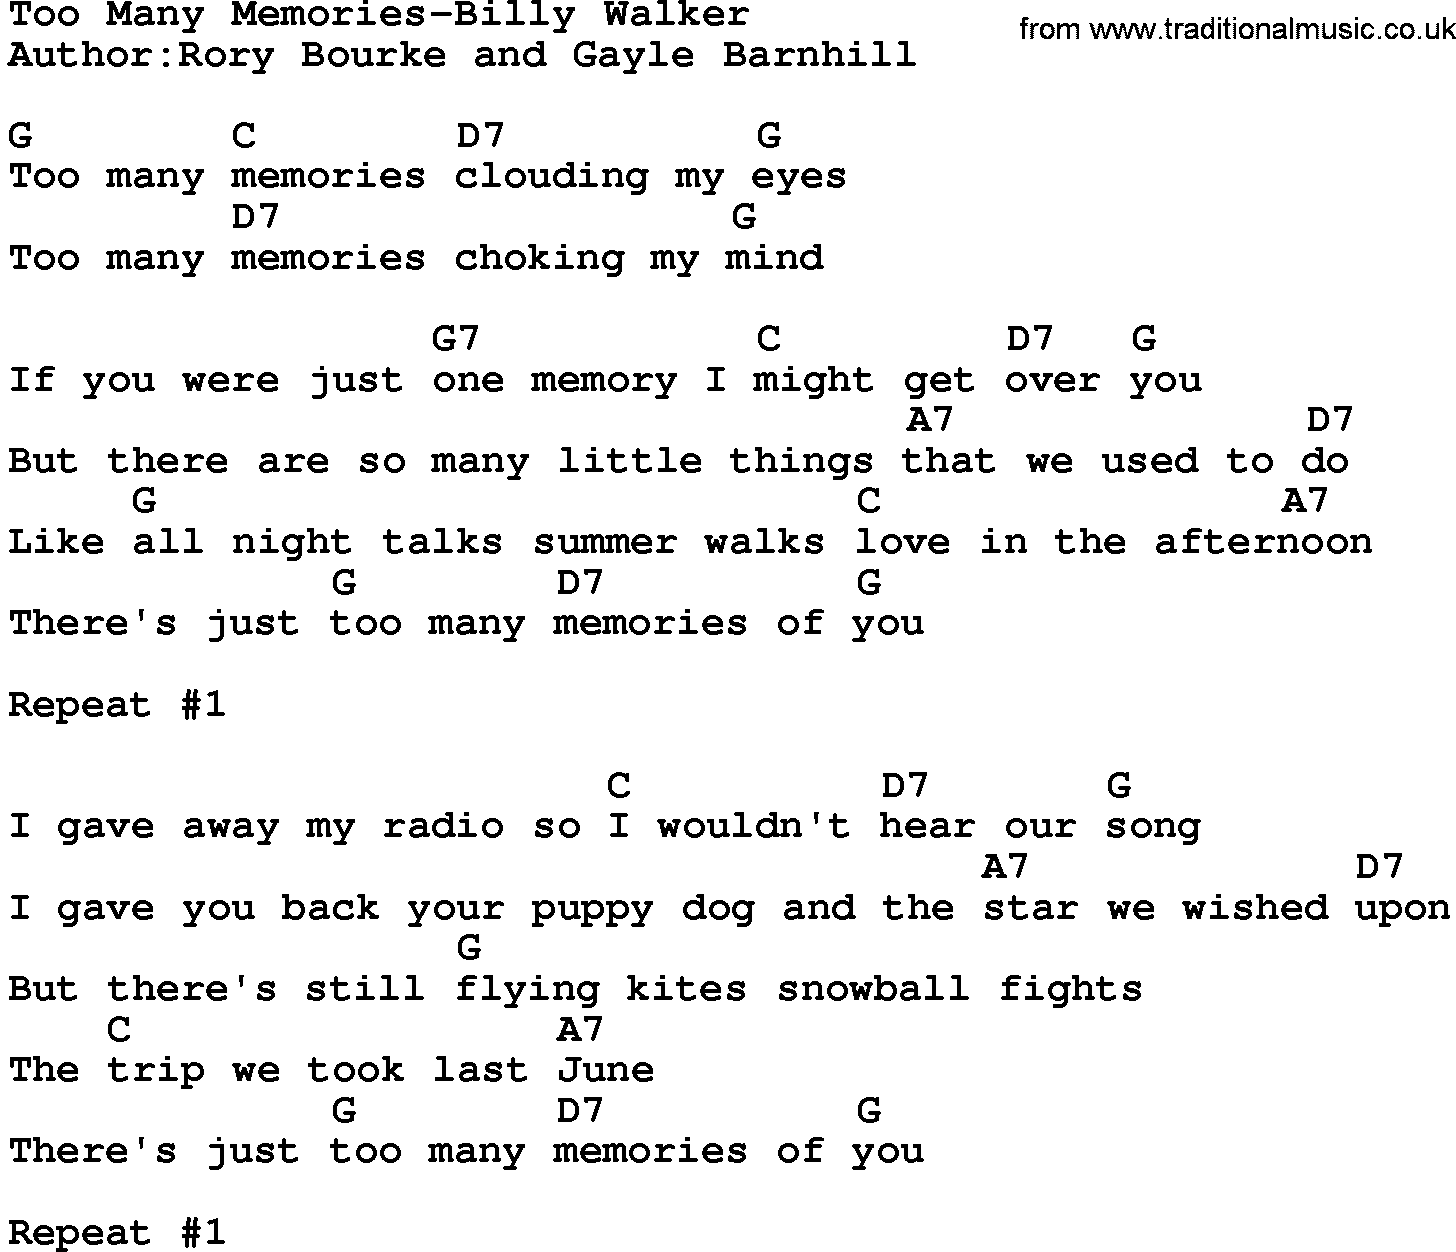 Country music song: Too Many Memories-Billy Walker lyrics and chords